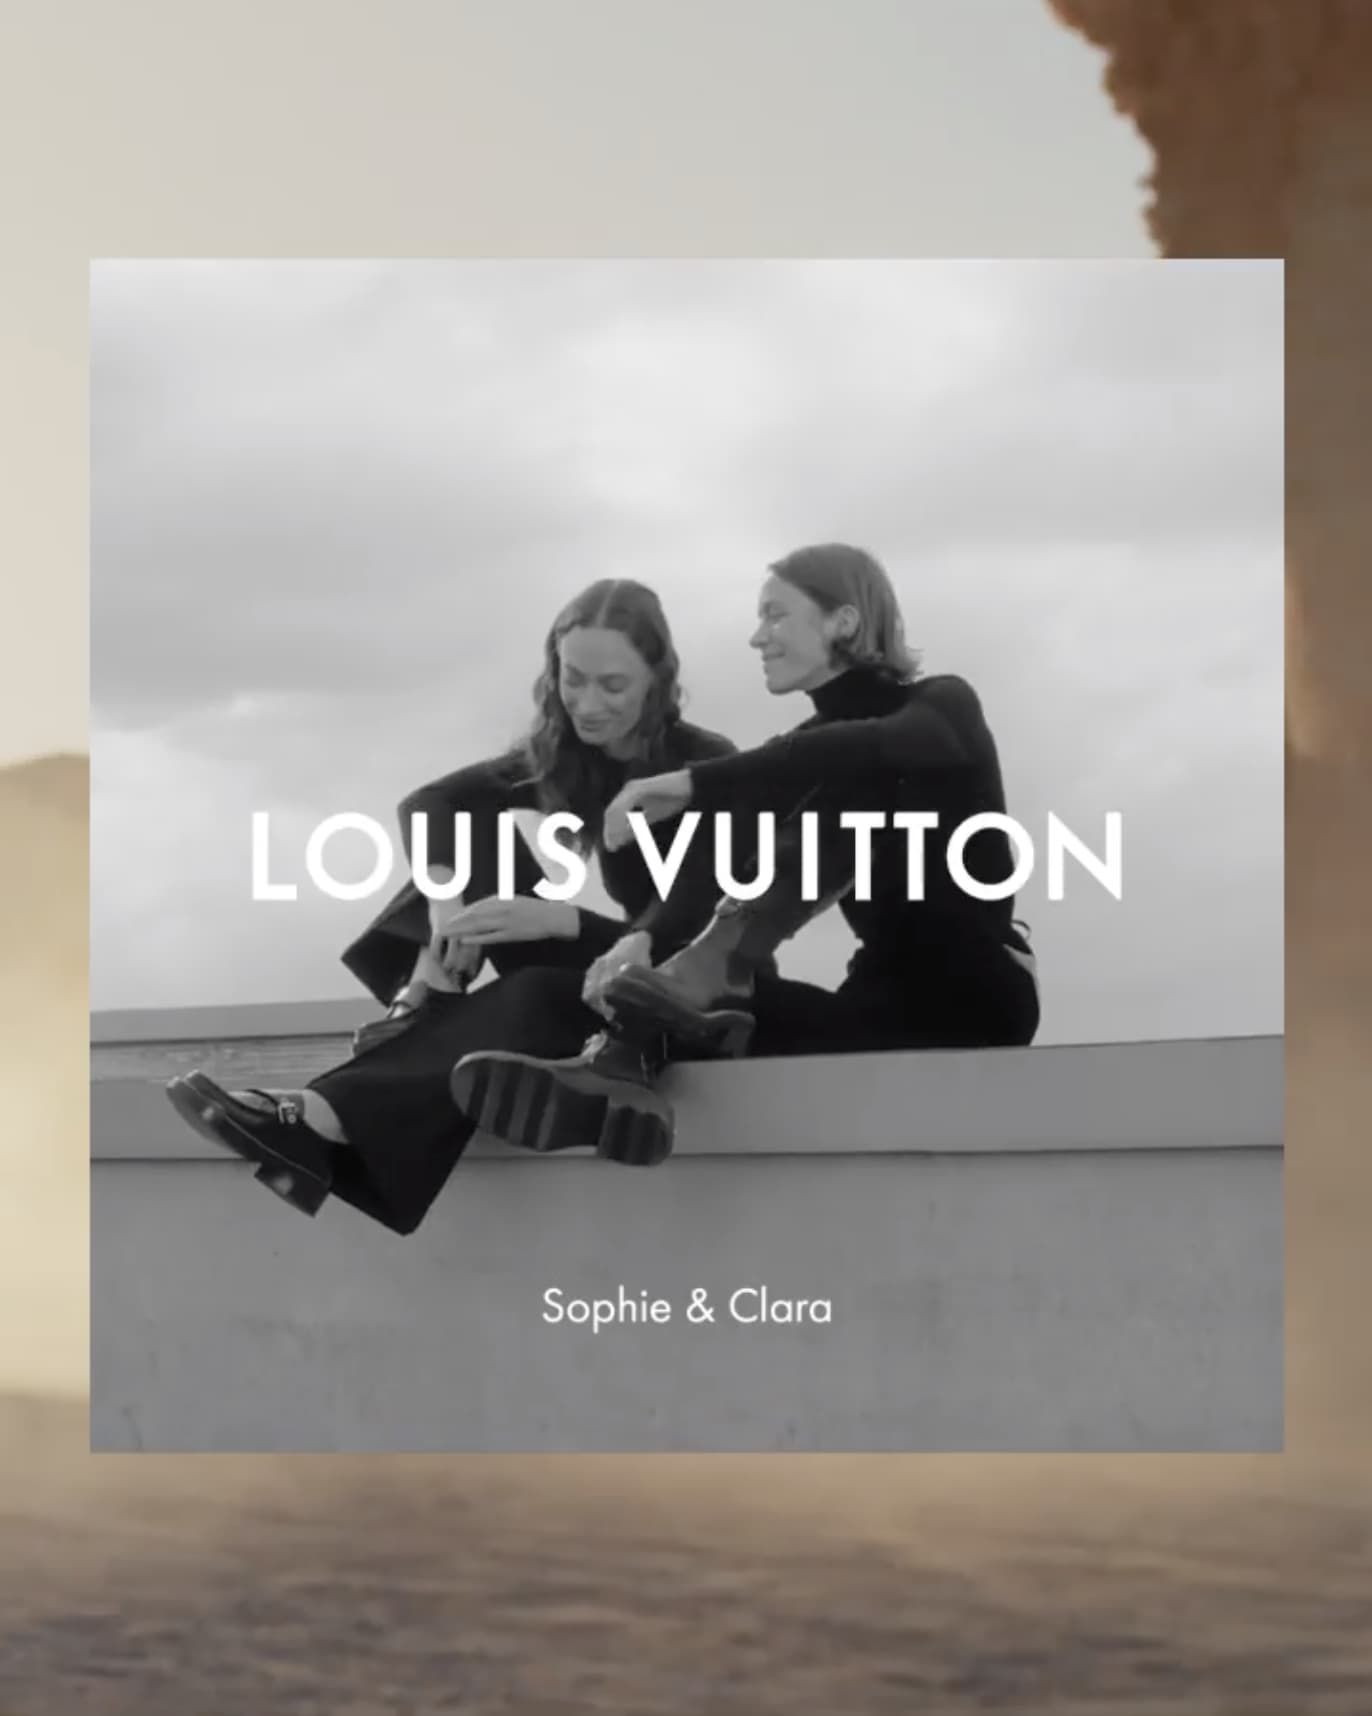 Louis Vuitton advertising campaign poster.